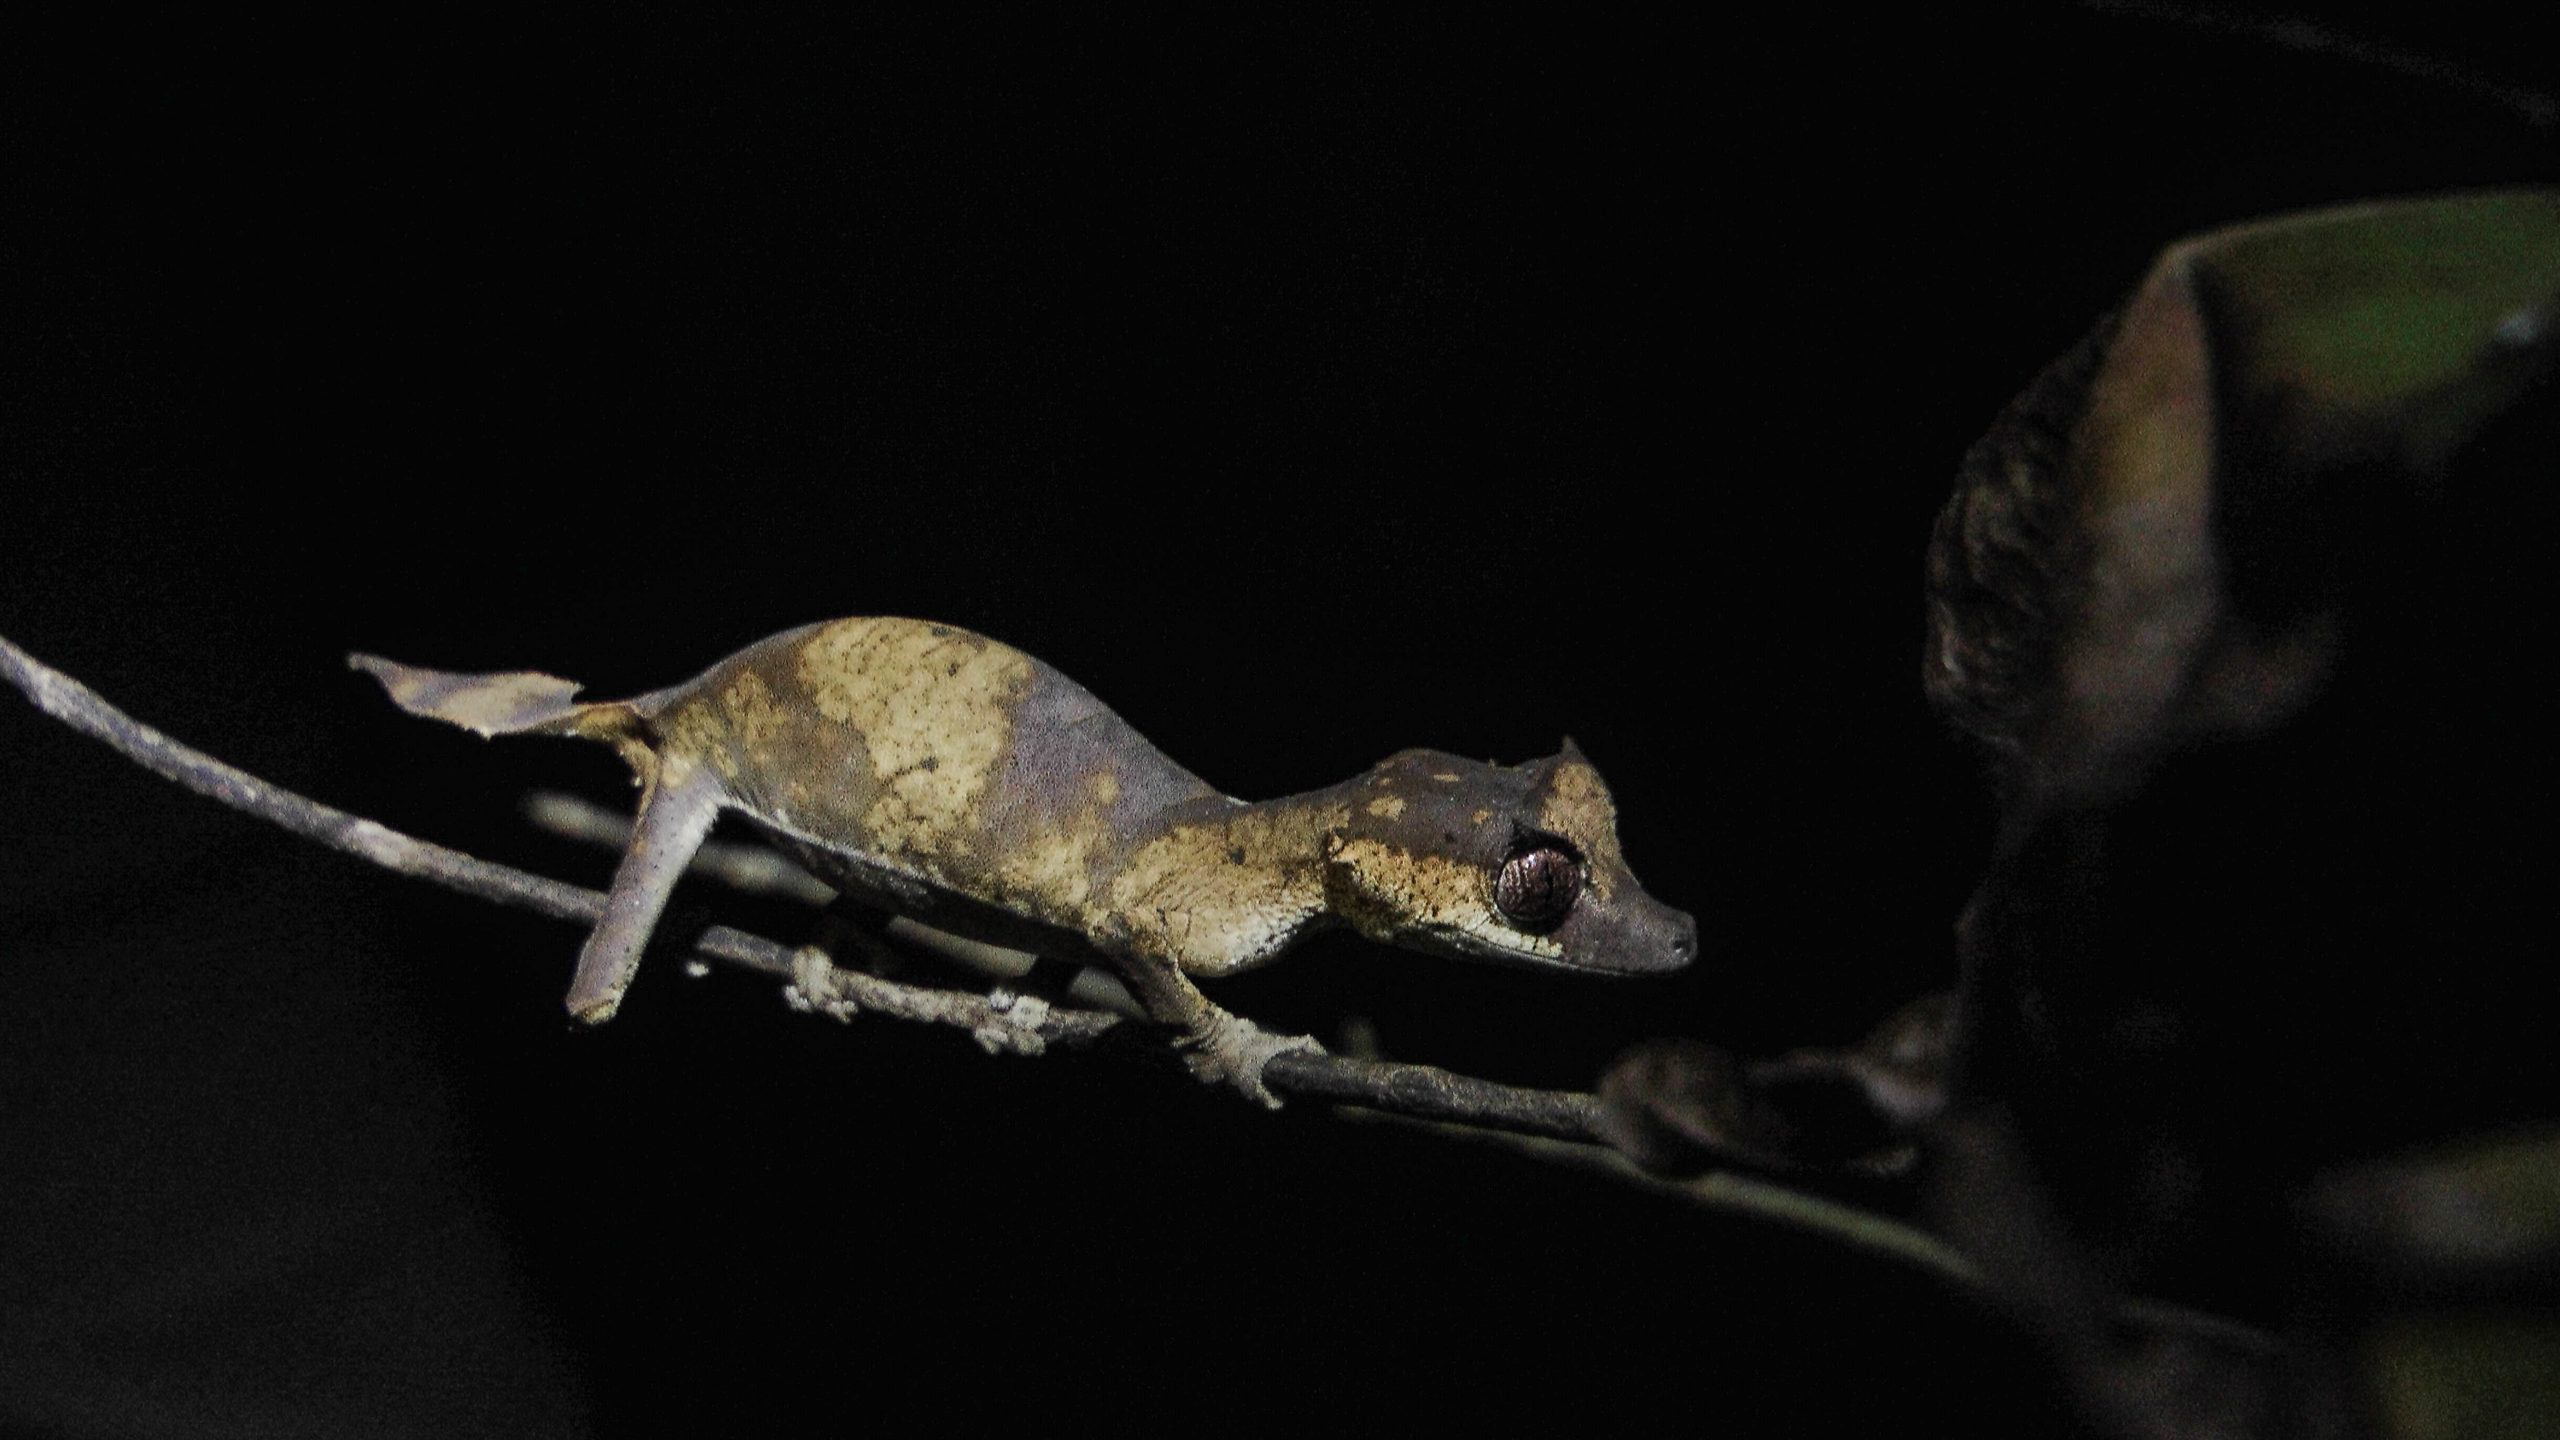 A Leaf tailed gecko, holding onto a branch. The gecko is coloured brown and yellow, as tree bark